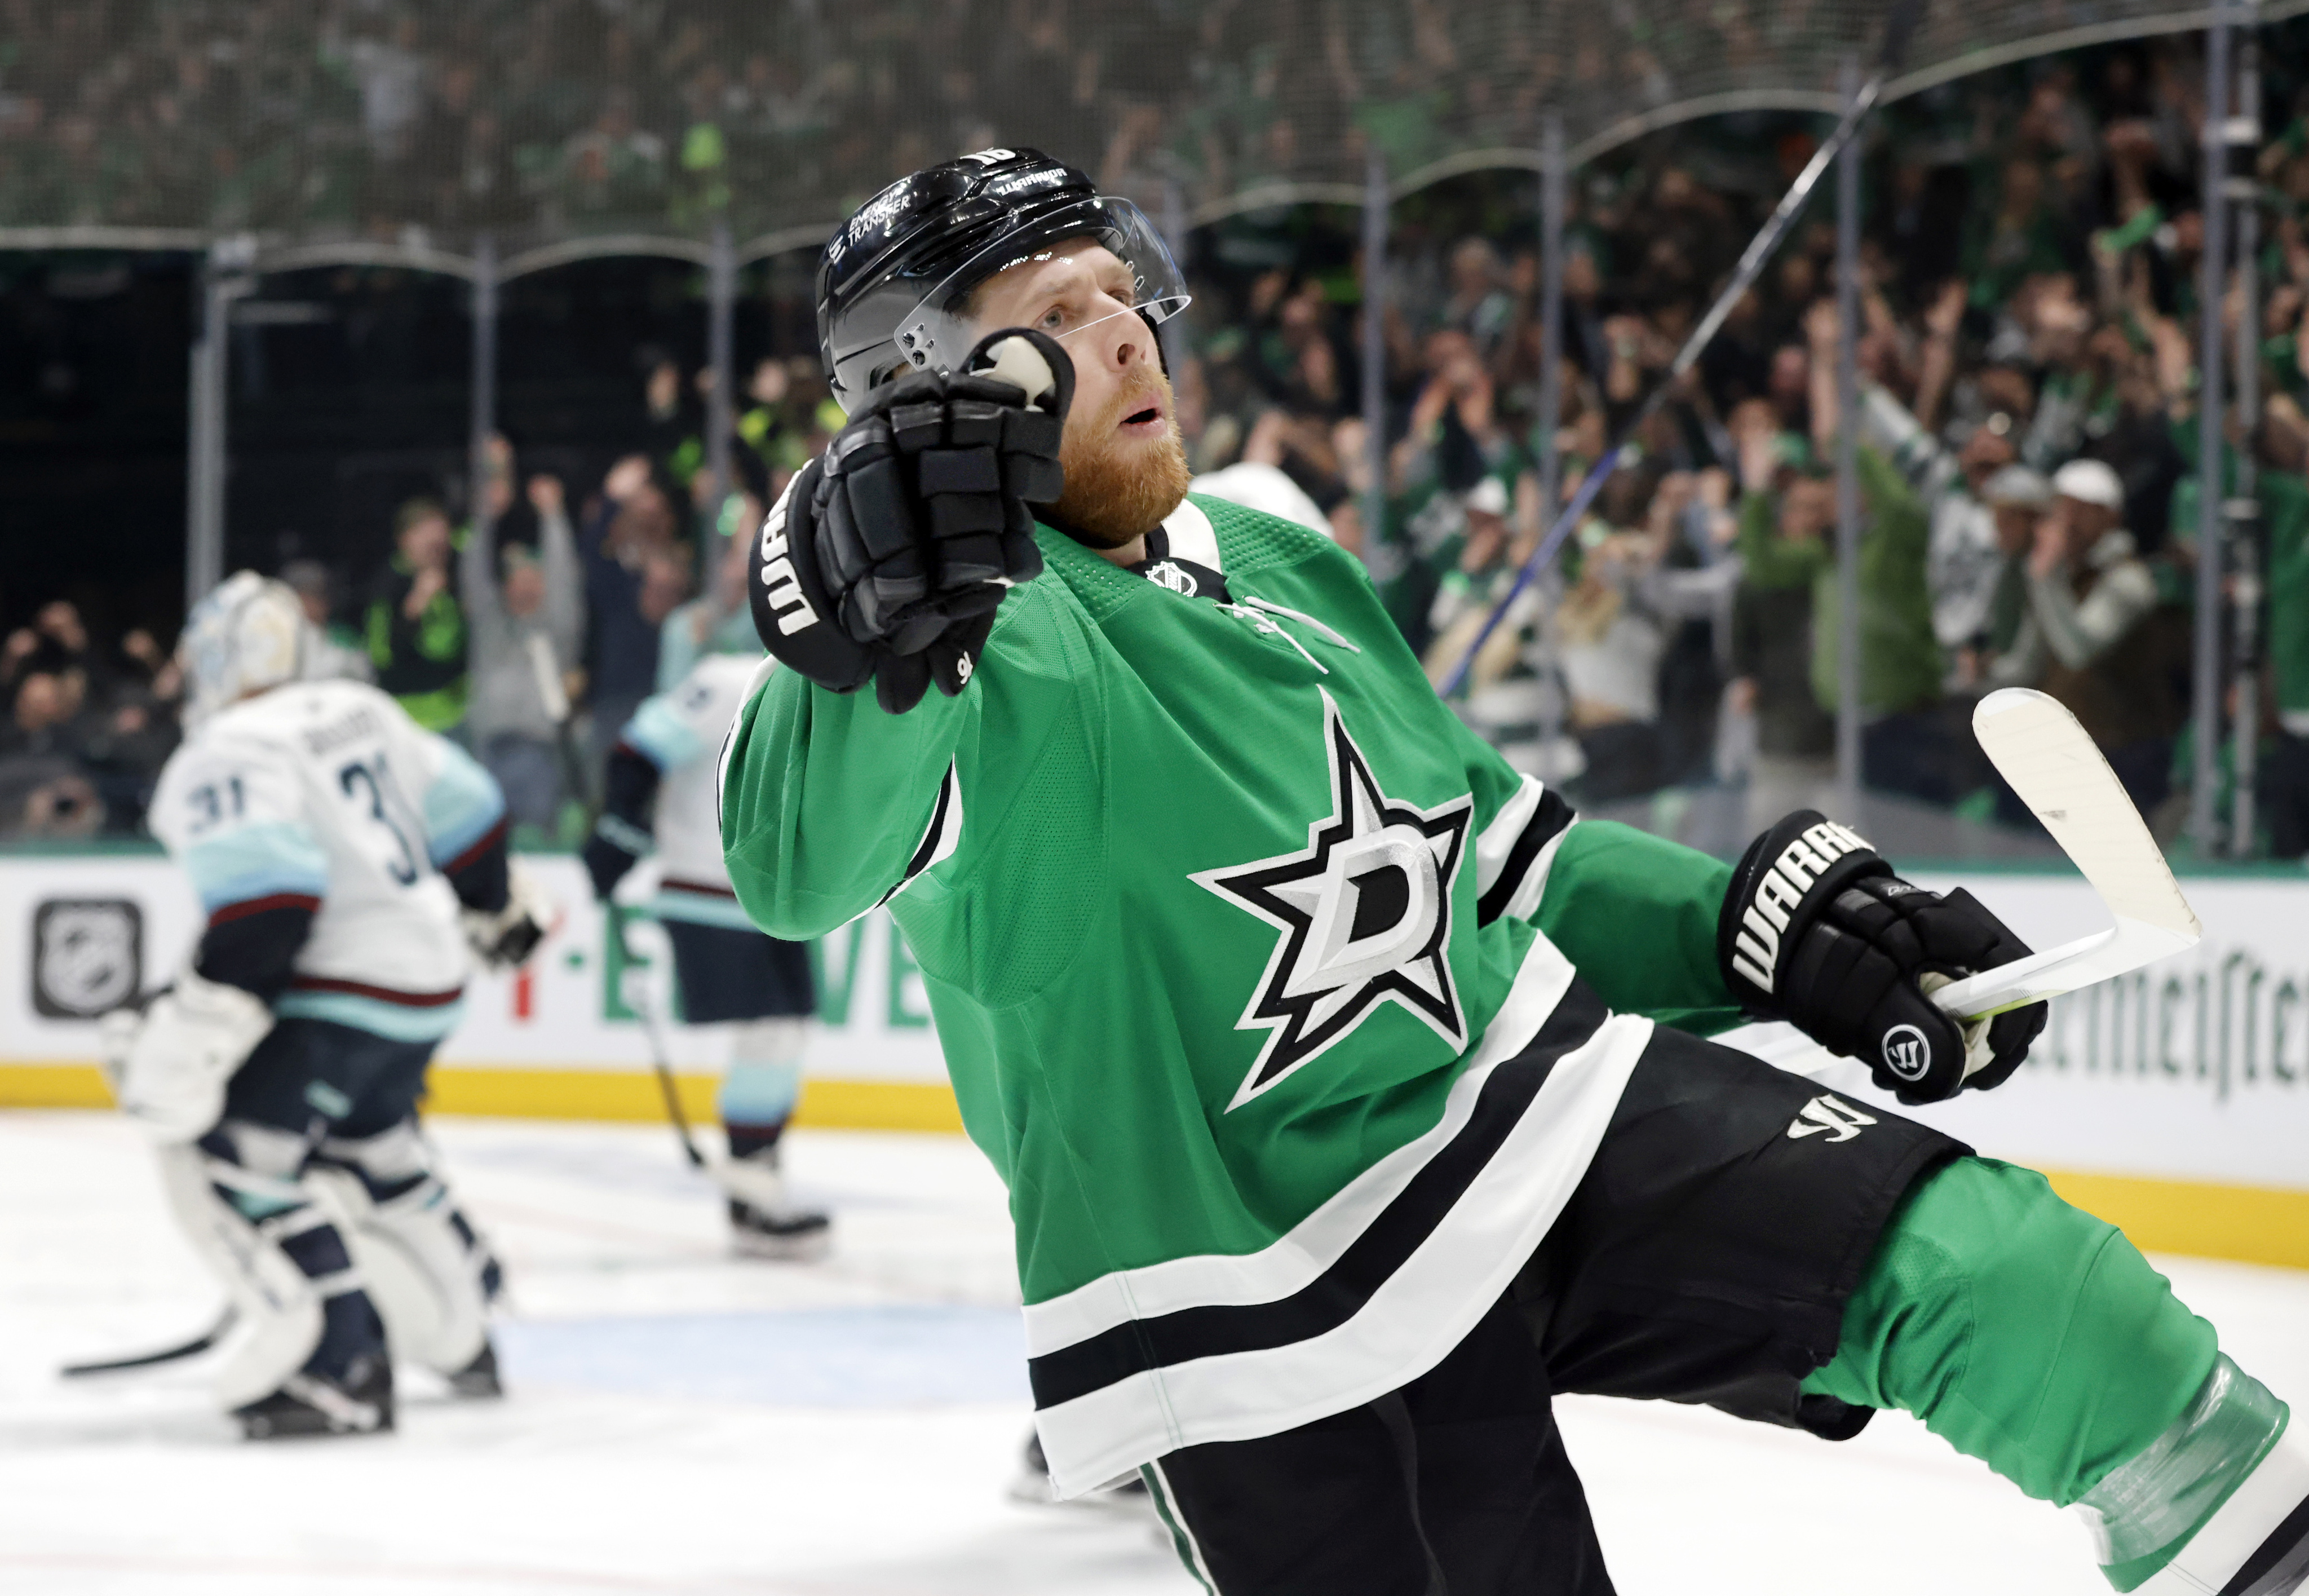 Dallas Stars fans with DirecTV miss out on Joe Pavelskis third goal vs